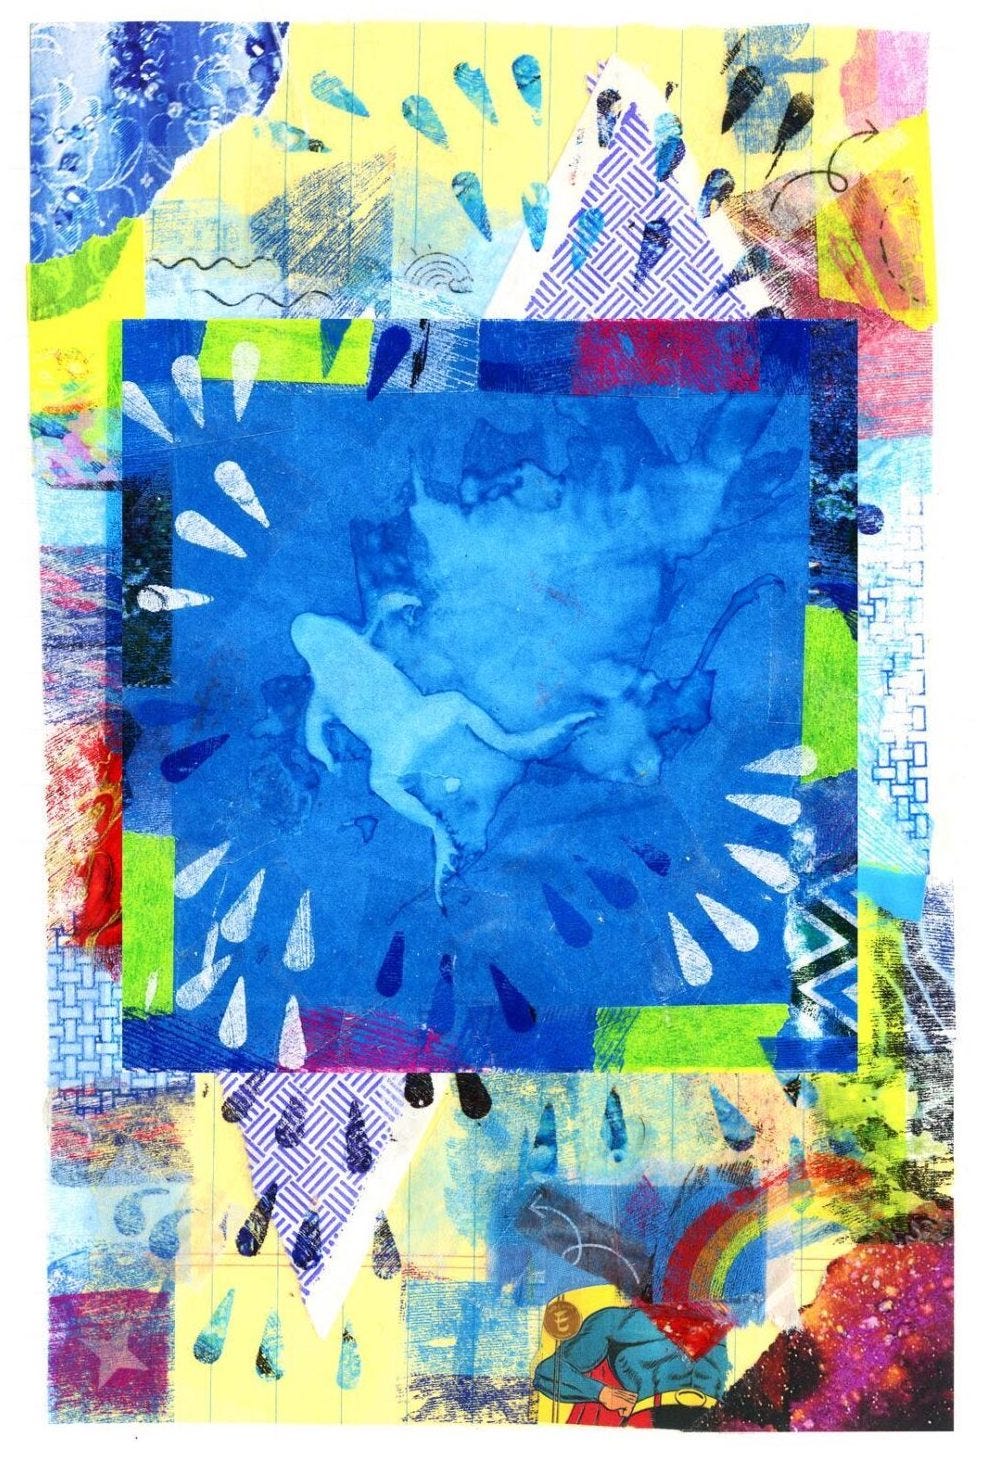 Experimental Printmaking with Collage - The Contemporary Austin